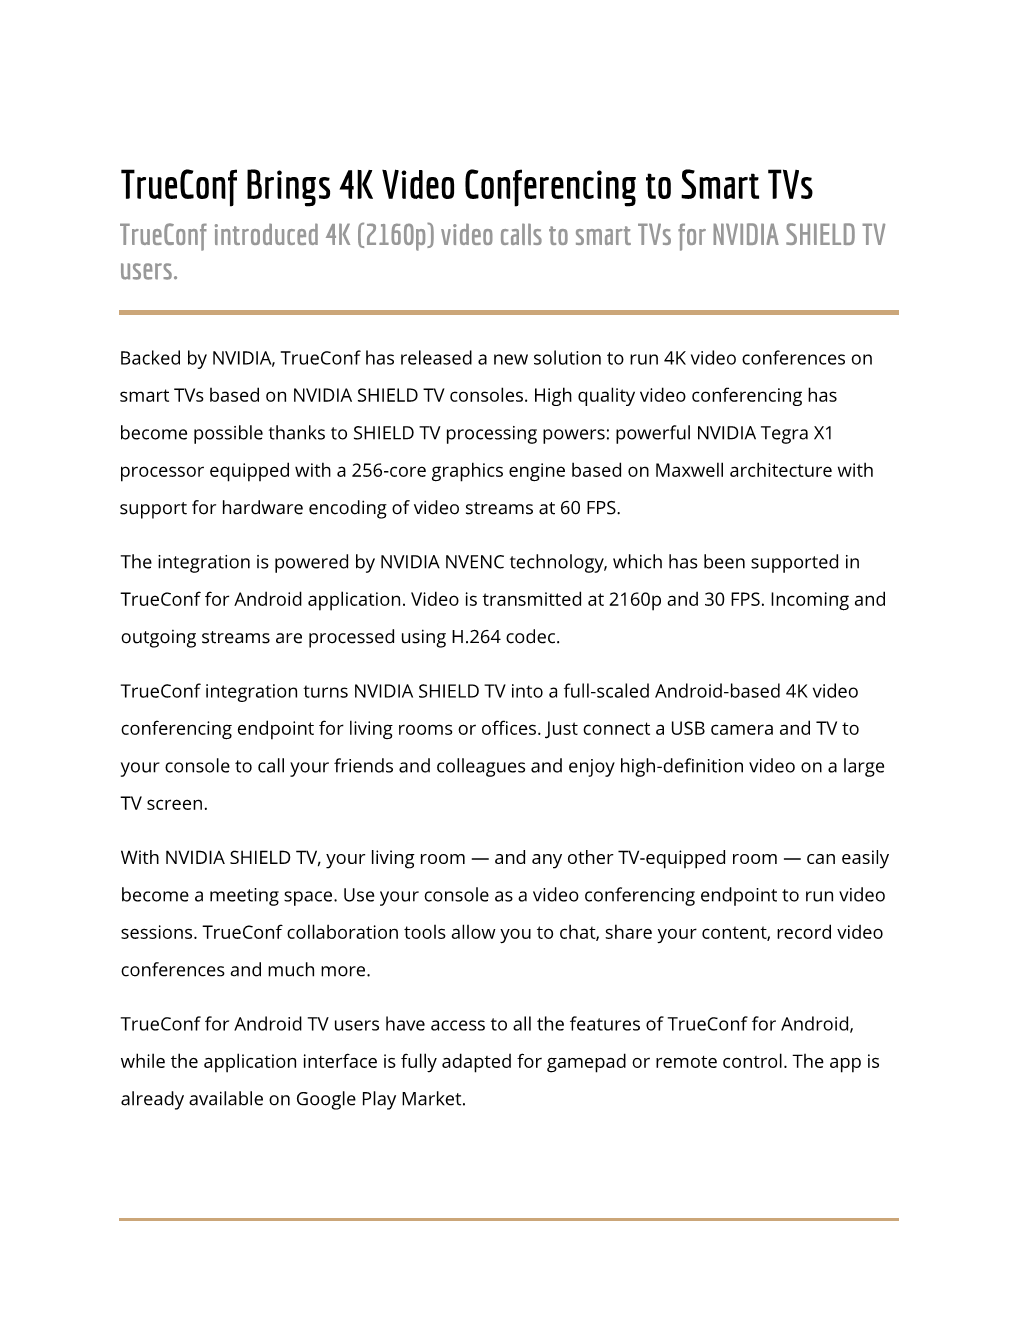 Trueconf Brings 4K Video Conferencing to Smart Tvs Trueconf Introduced 4K (2160P) Video Calls to Smart Tvs for NVIDIA SHIELD TV Users